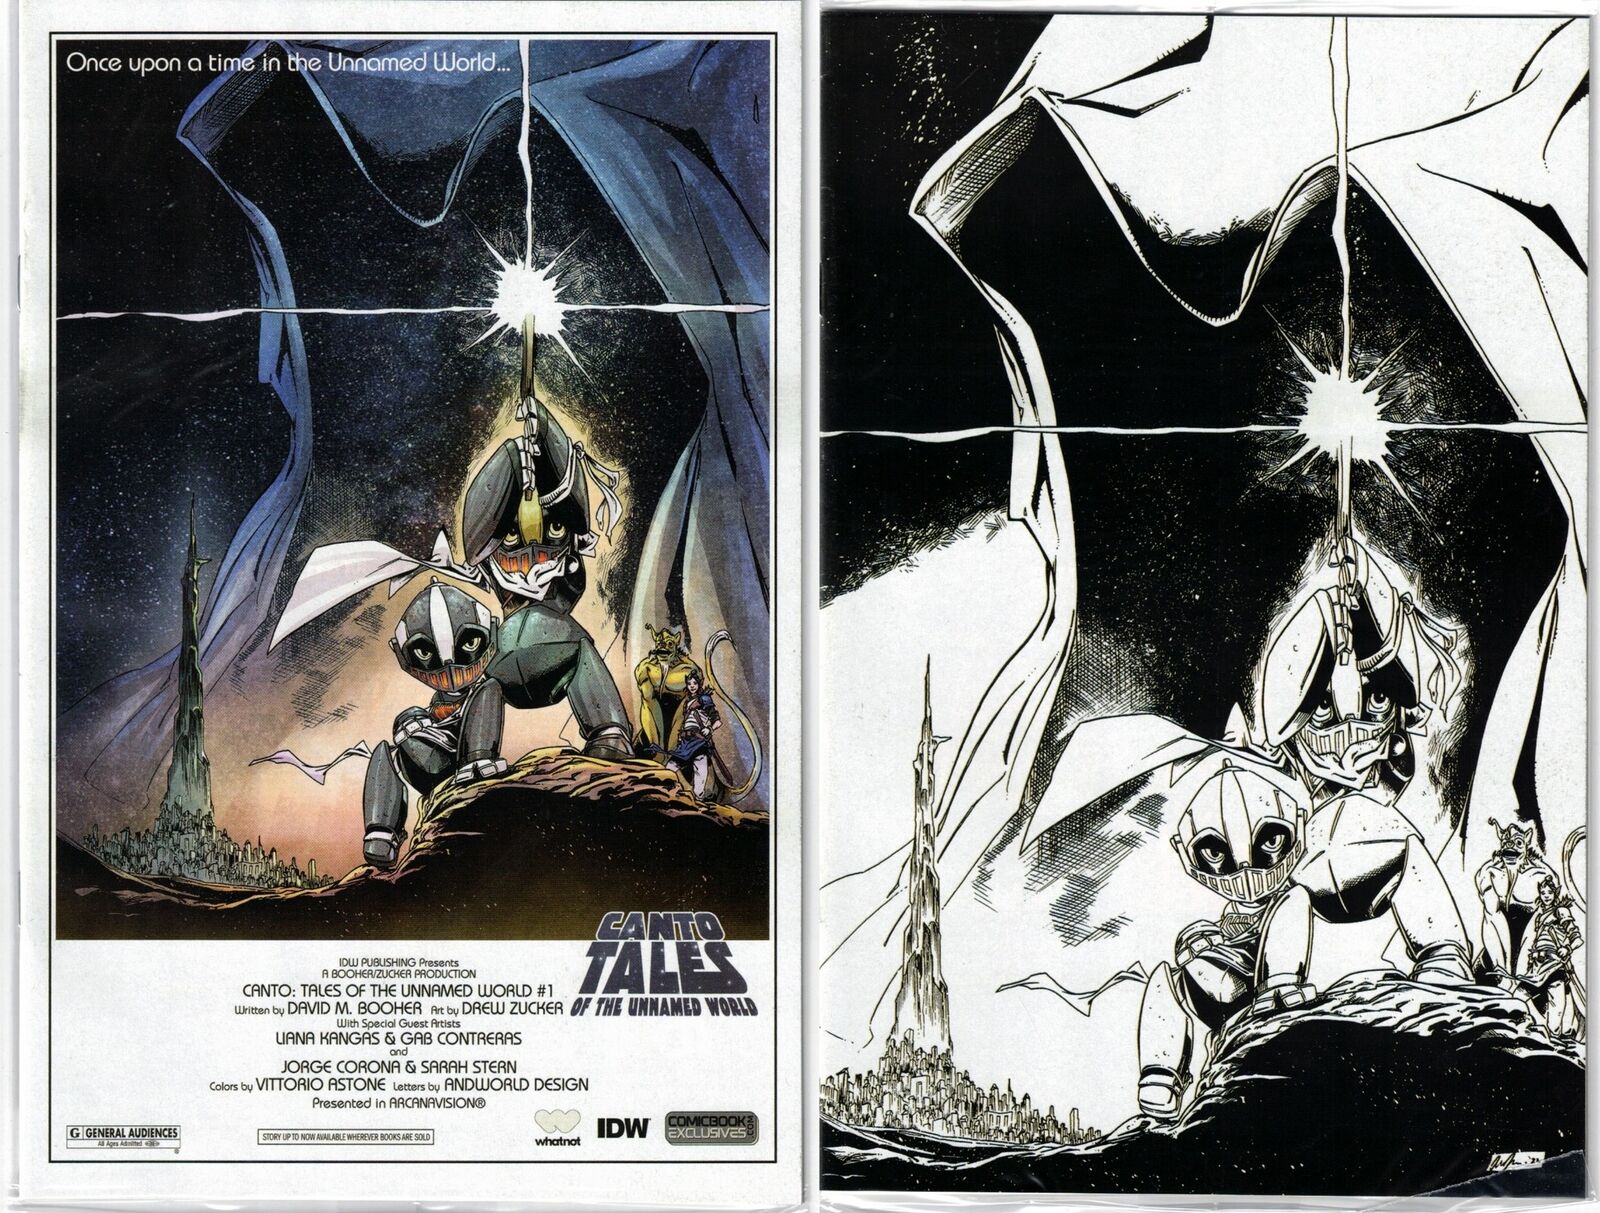 CANTO TALES OF THE UNNAMED WORLD #1- WHATNOT EXCLUSIVE STAR WARS VARIANT SET